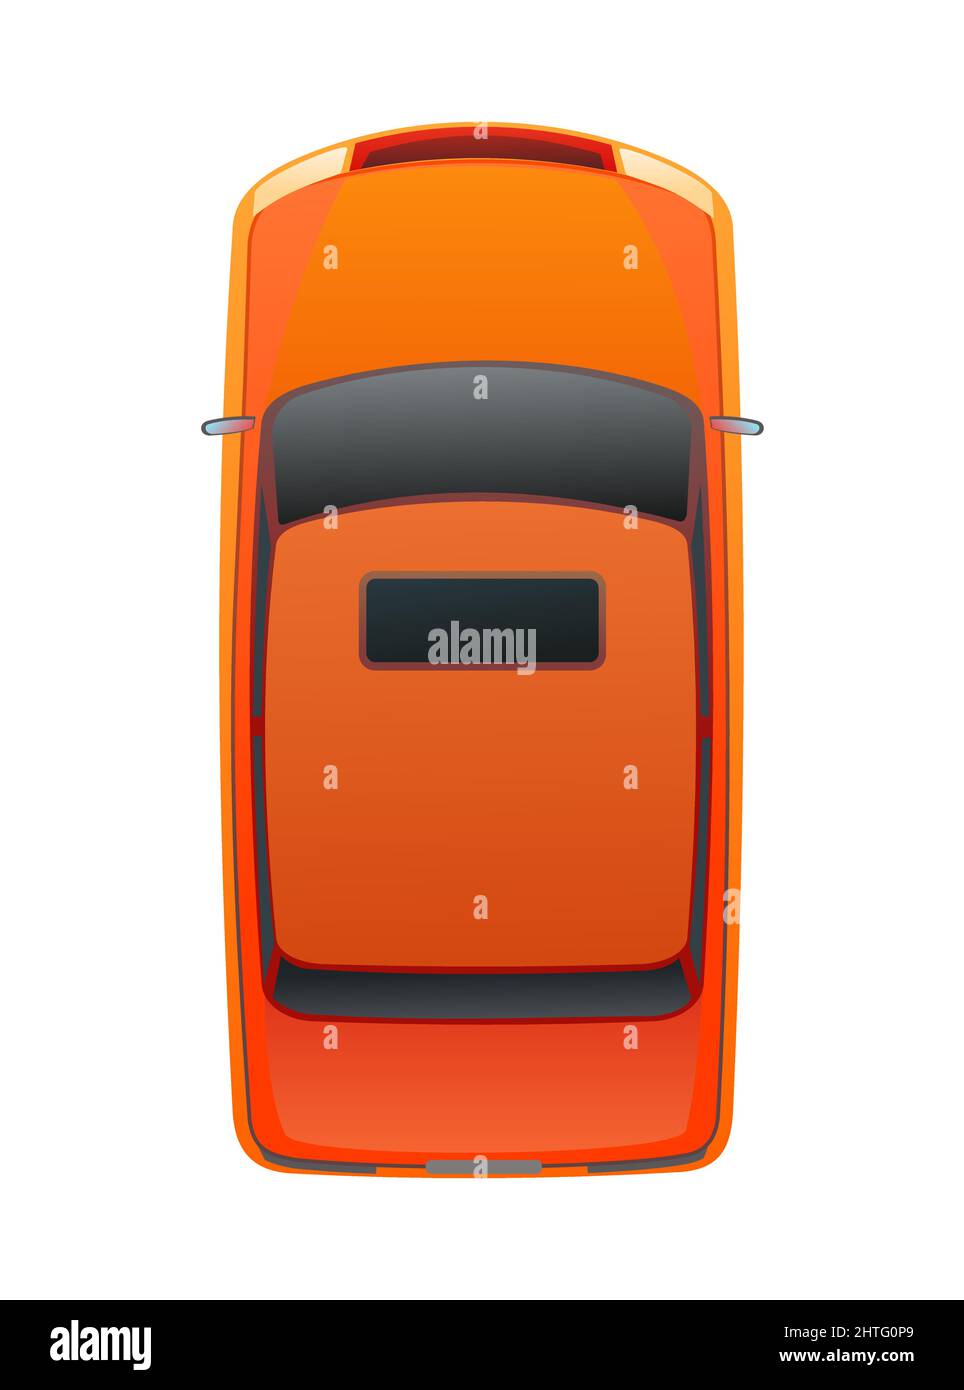 Orange family automobile with skylight. View from above. Modern car. Cartoon cute style illustration. Object isolated on white background. Vector. Stock Vector